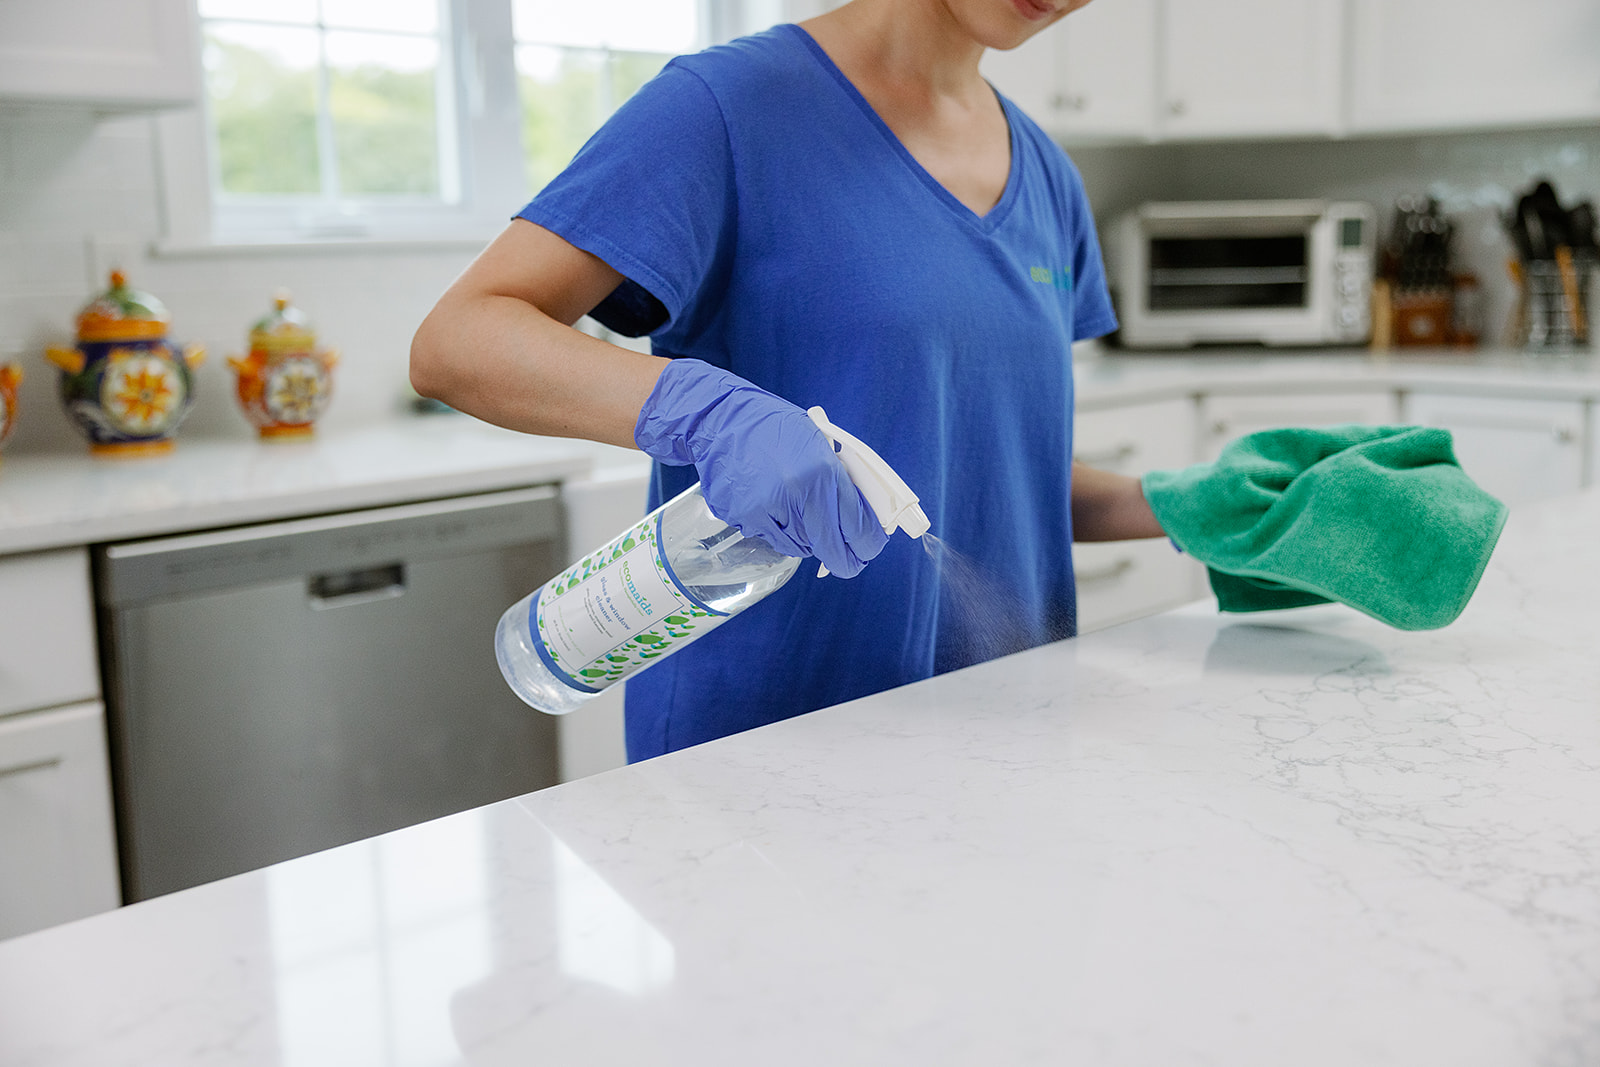 Maid Services in Federal Way